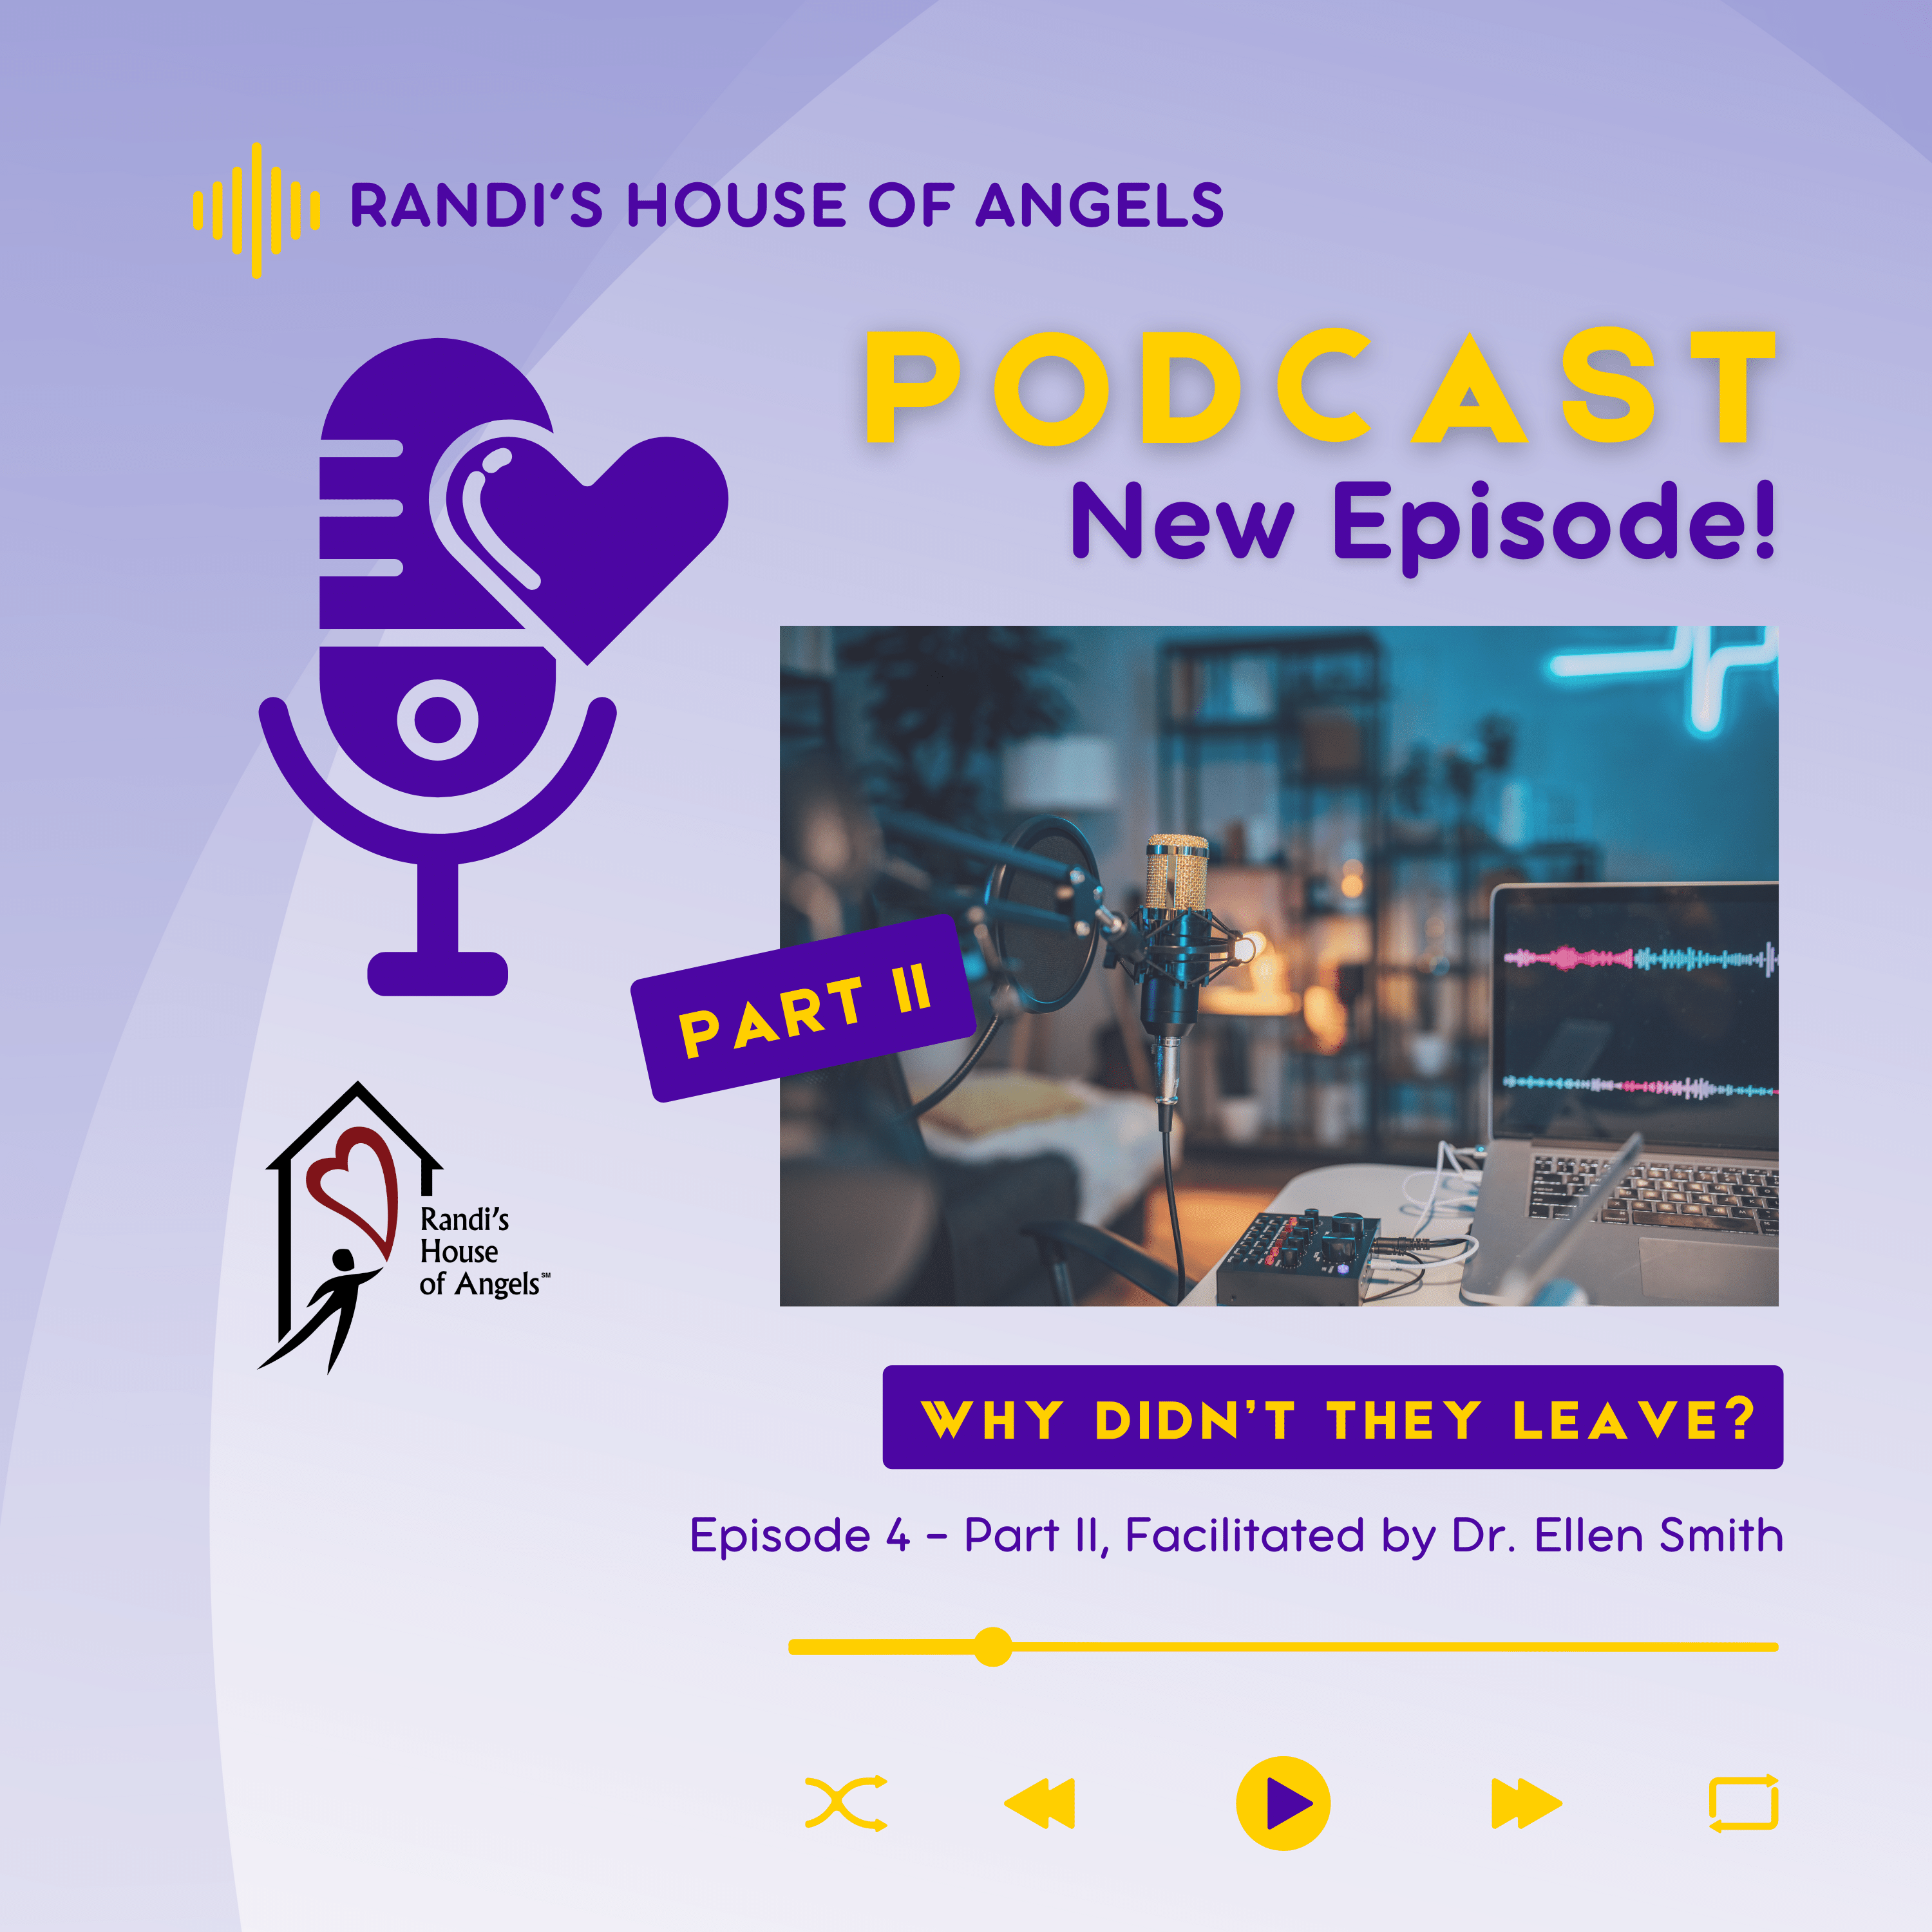 Randi's House of Angels (RHOA) Podcast Episode 4 - Why didn't they leave? Exploring the reasons why people stay in unhealthy relationships - Part 2 - cover art